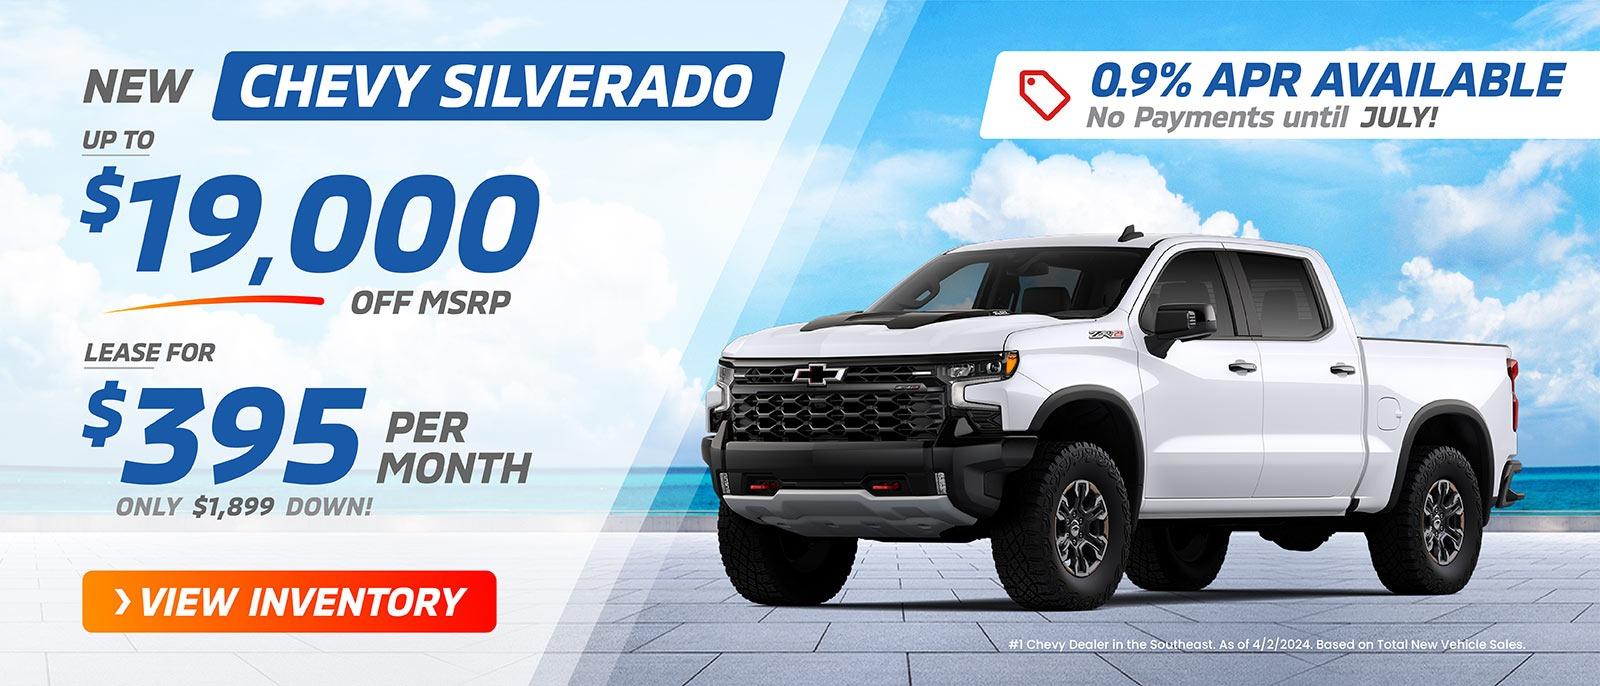 New Chevy Silverado
UP TO $19,000 OFF MSRP
OR Lease for as low as $395 per month w/ $1,899 down